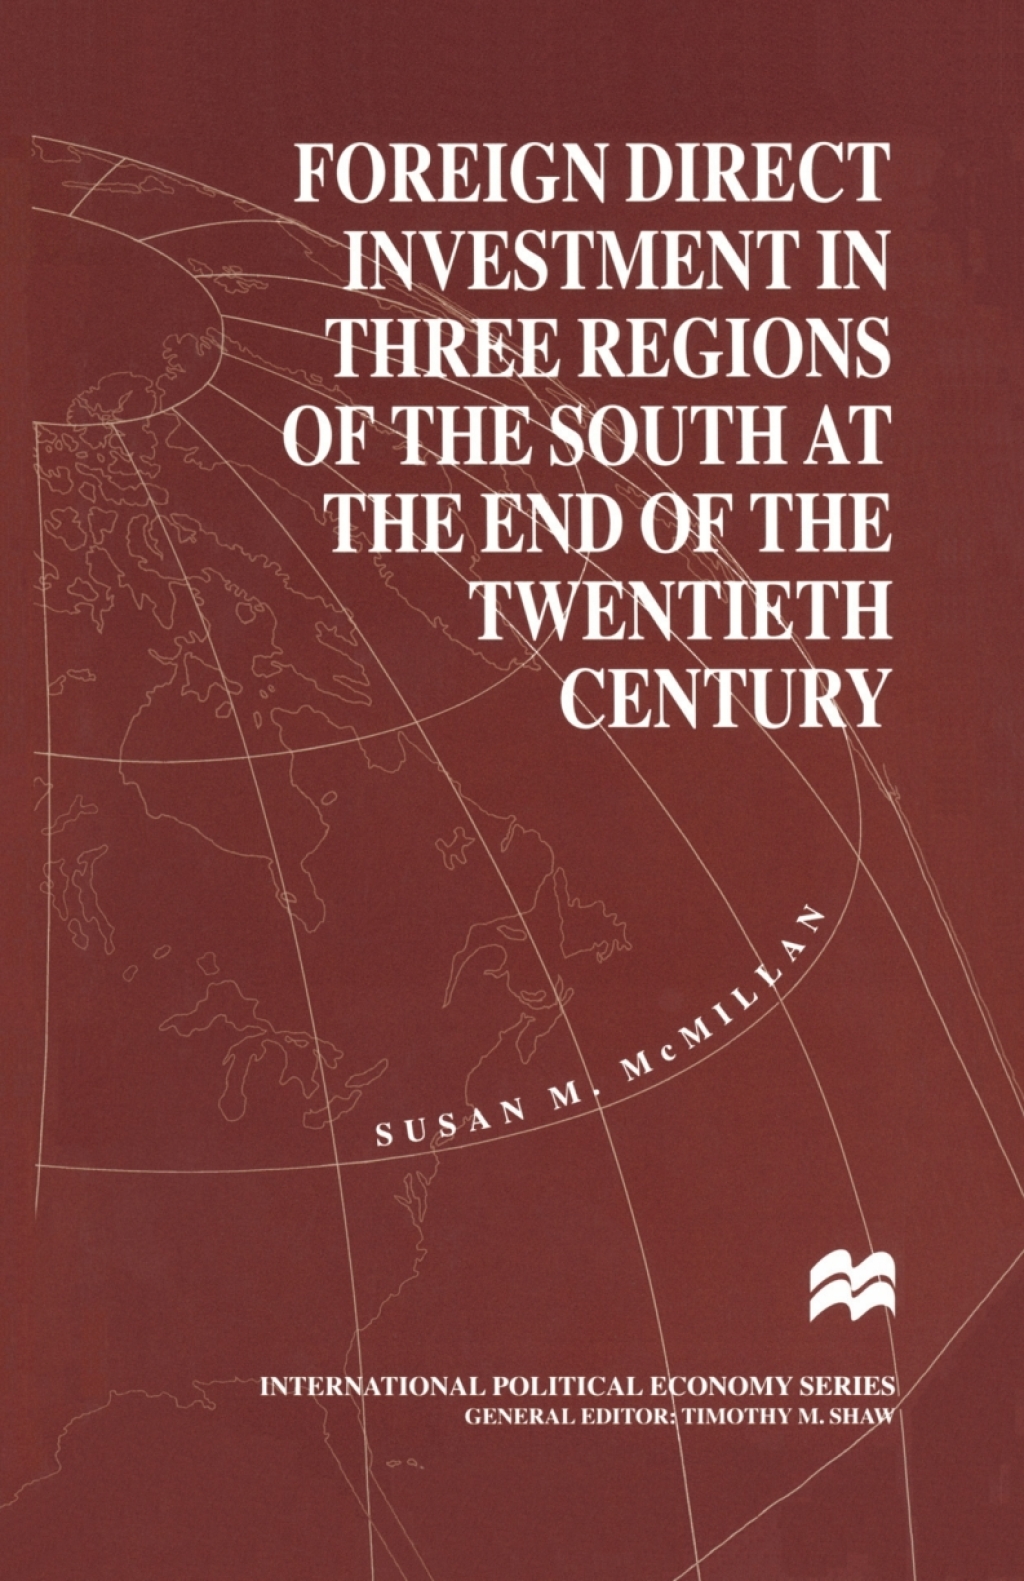 Foreign Direct Investment in Three regions of the South at 20th Century (eBook Rental) - Susan M. McMillan,